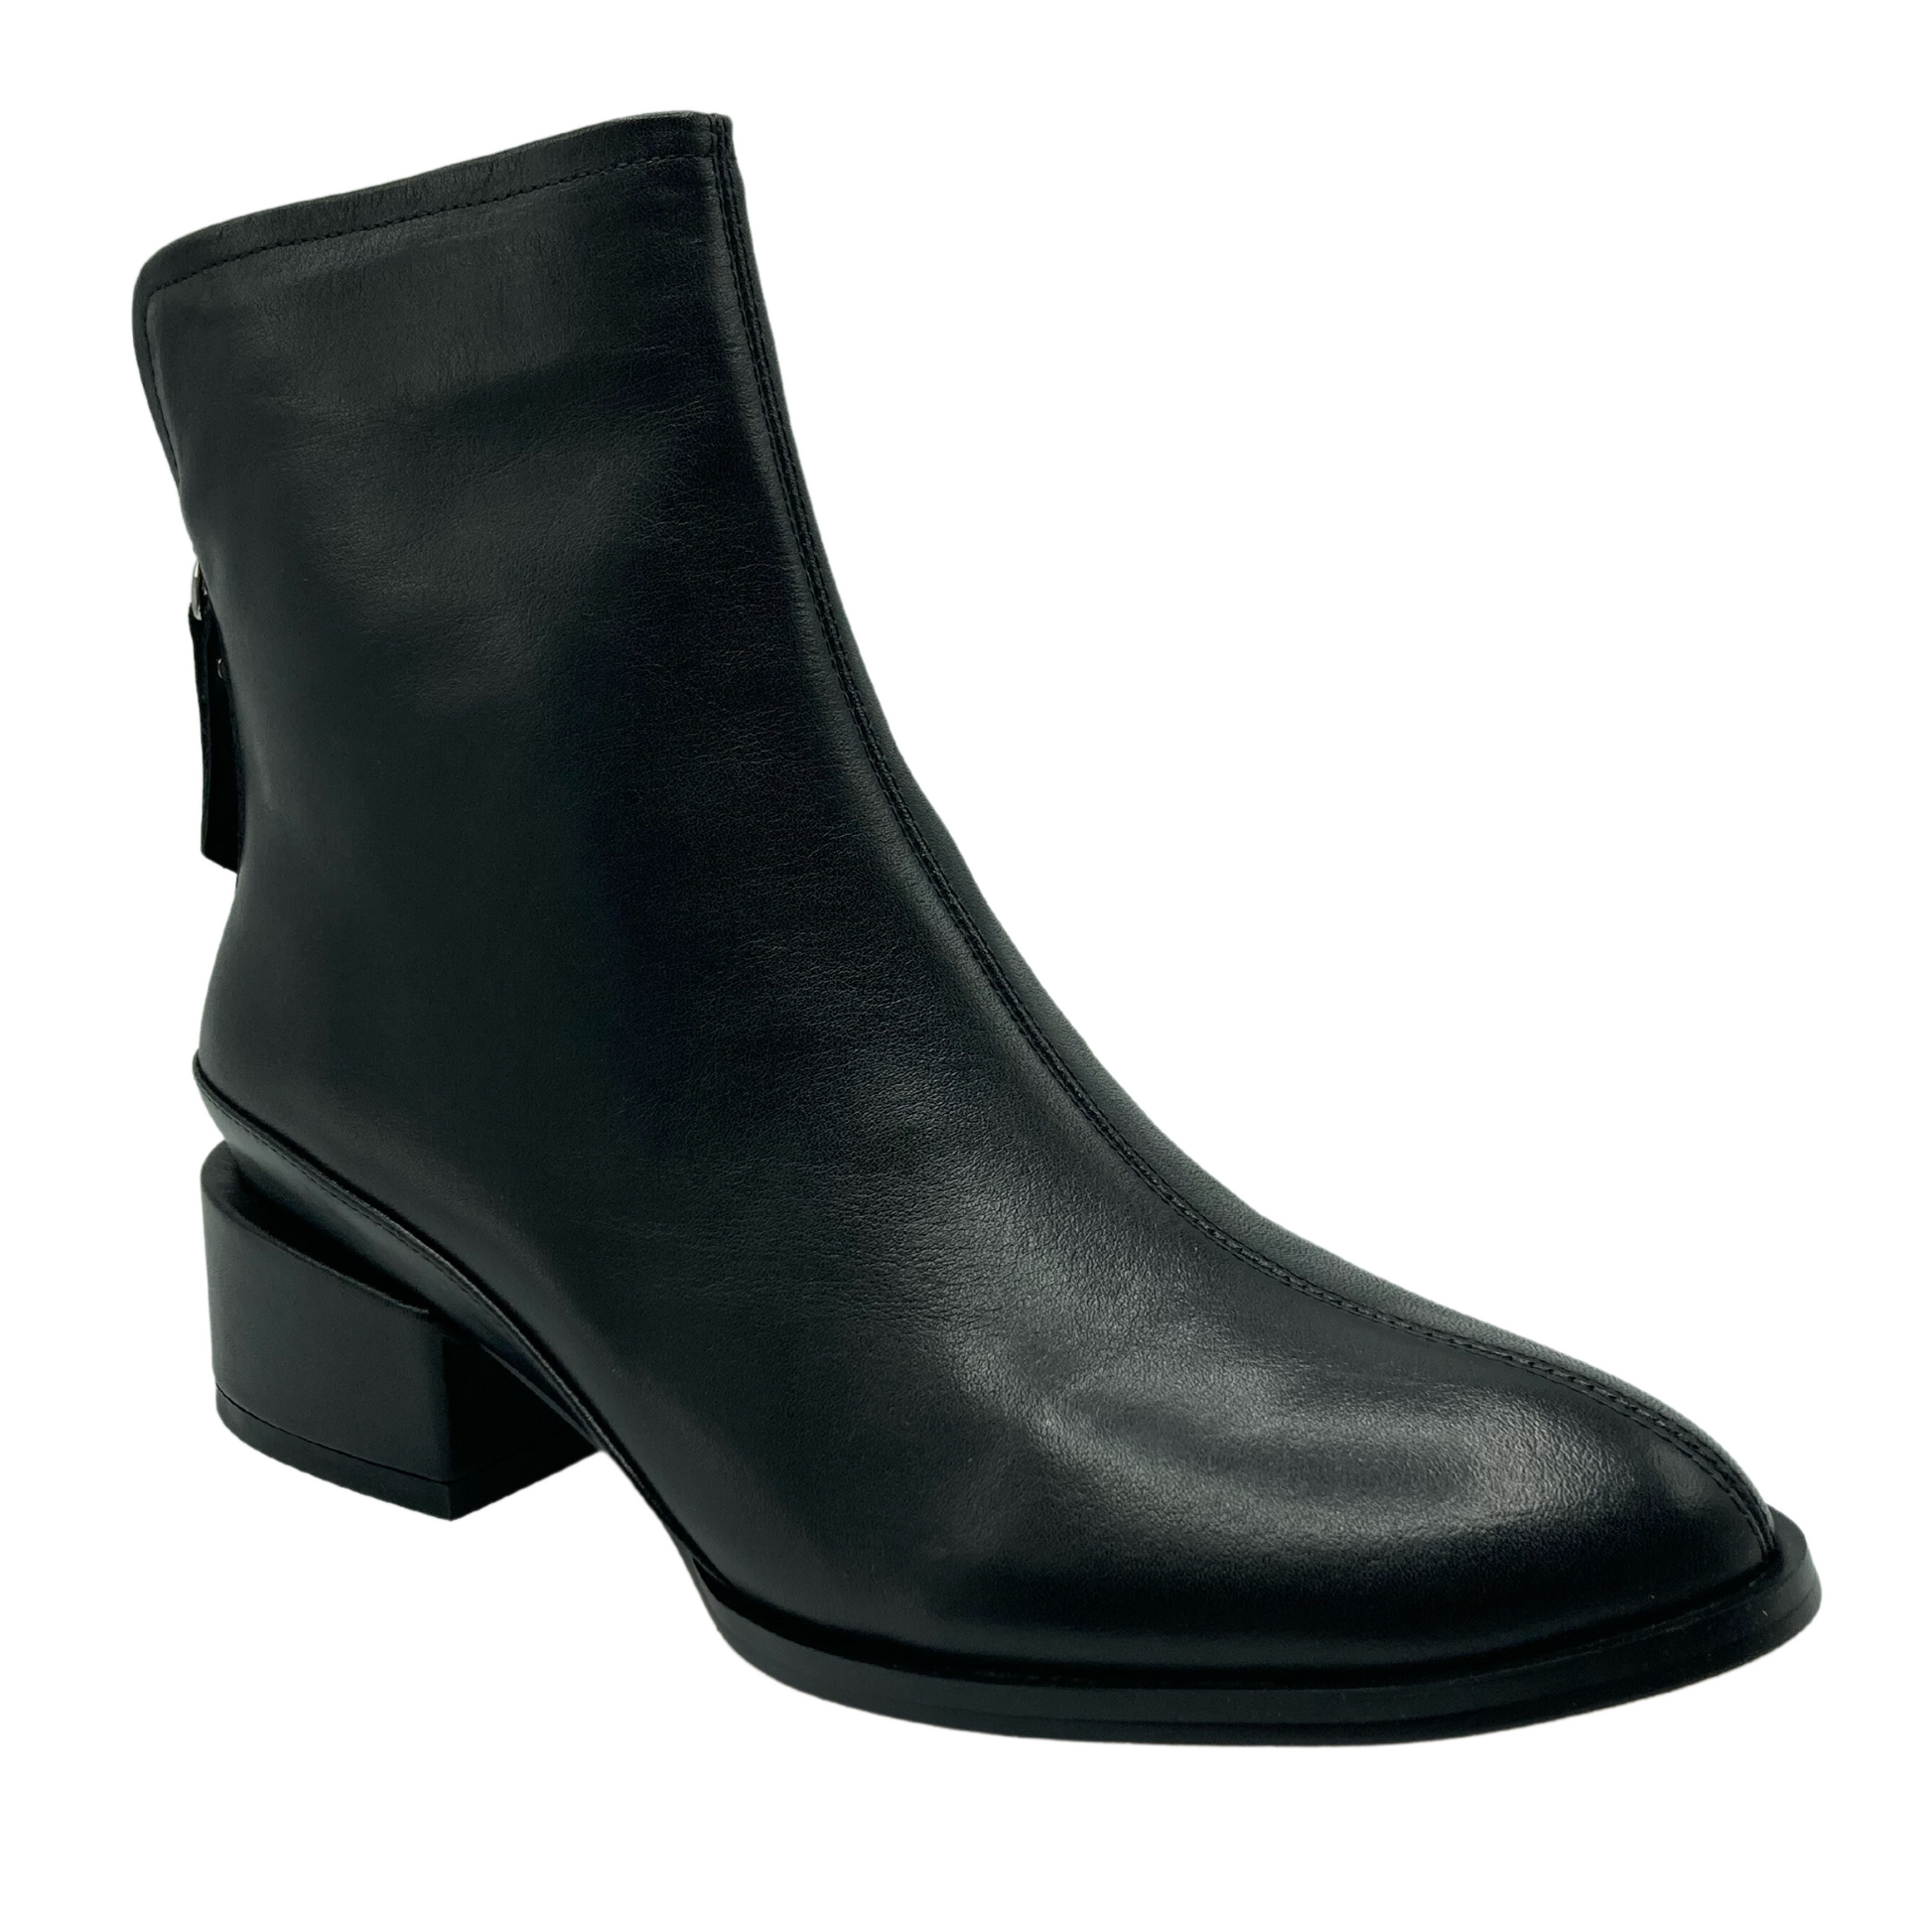 45 degree angled view of black leather ankle boot with block heel and almond toe